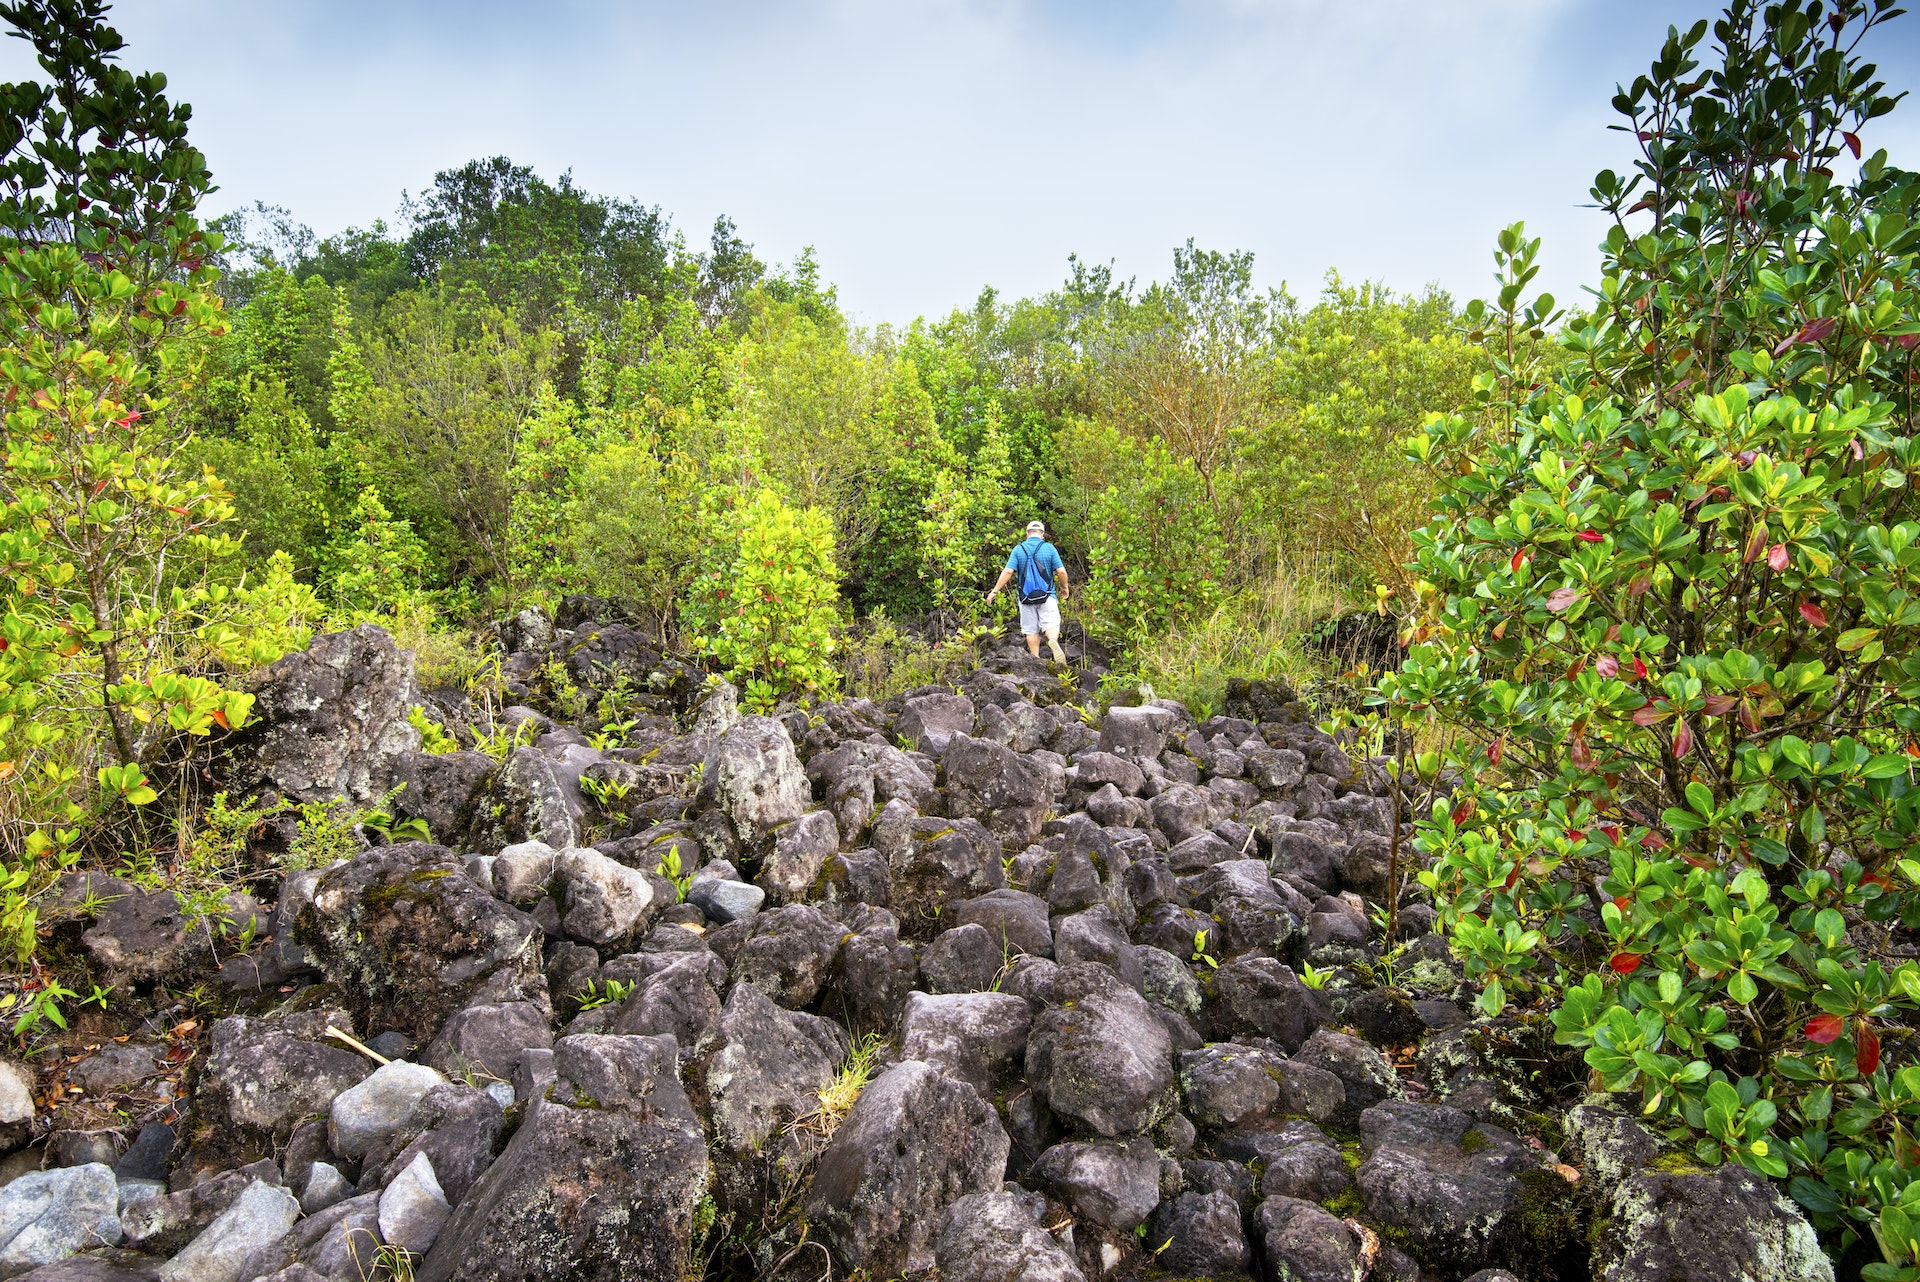 On the Sendero Las Coladas in Arenal Volcano National Park, a tourist climbs over the rocky remnants of the southernmost lava fields from the last major eruption of the Arenal Volcano in 1968.